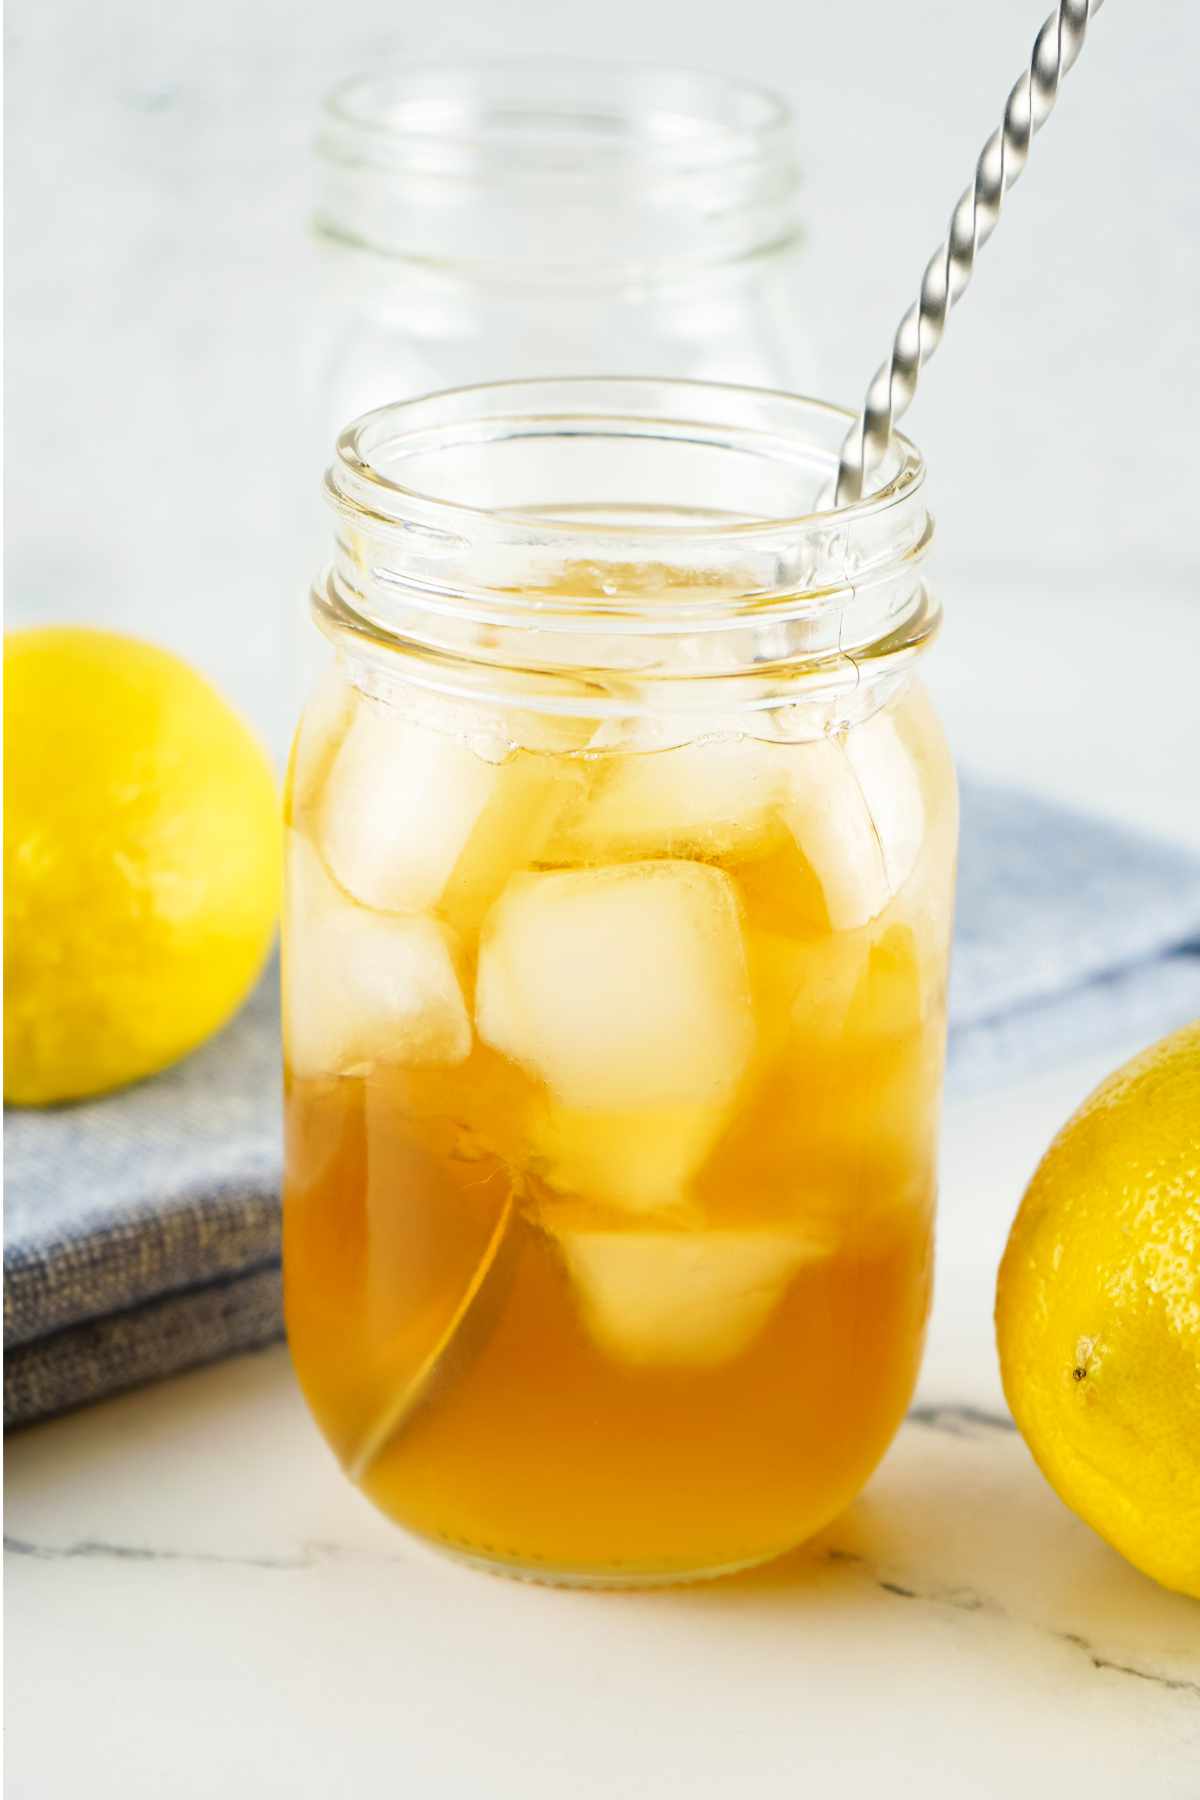 Mason jar filled with Arnold Palmer Cocktail with a straw.